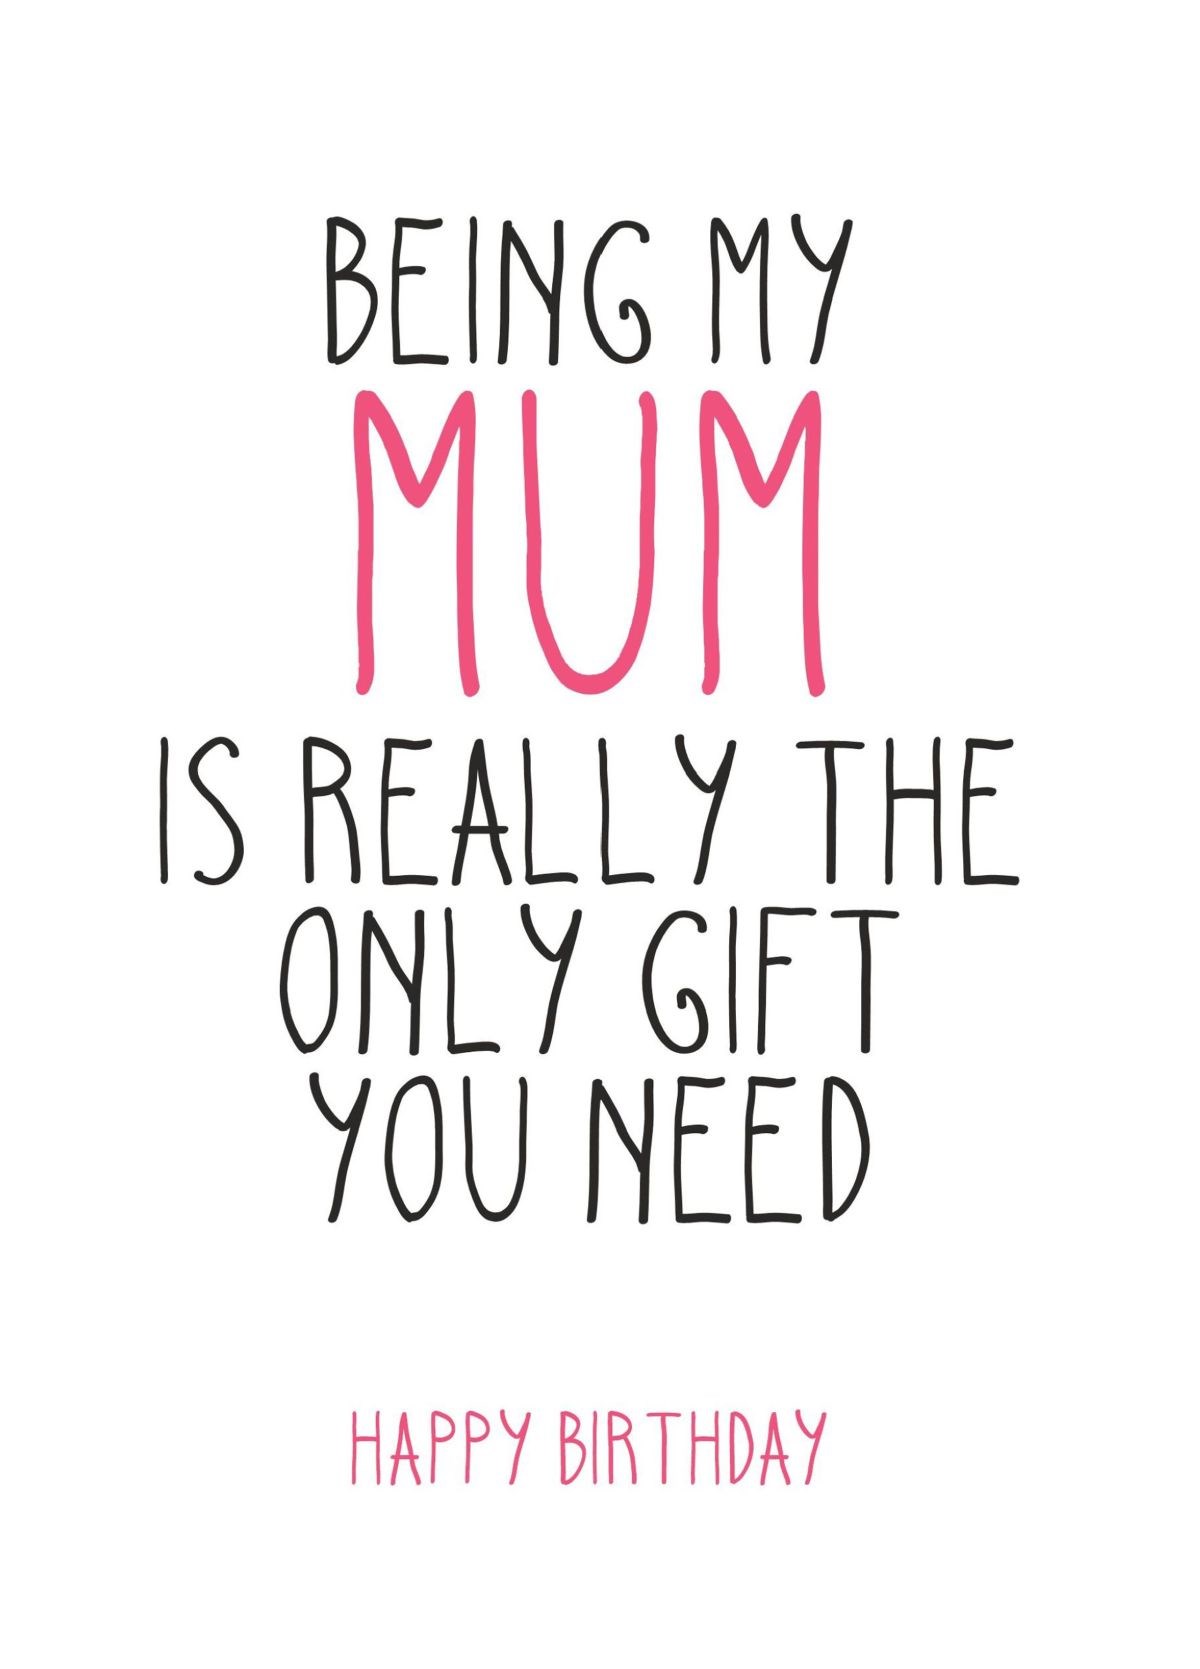 The Only Gift You Need This Birthday, Mum Card | Scribbler